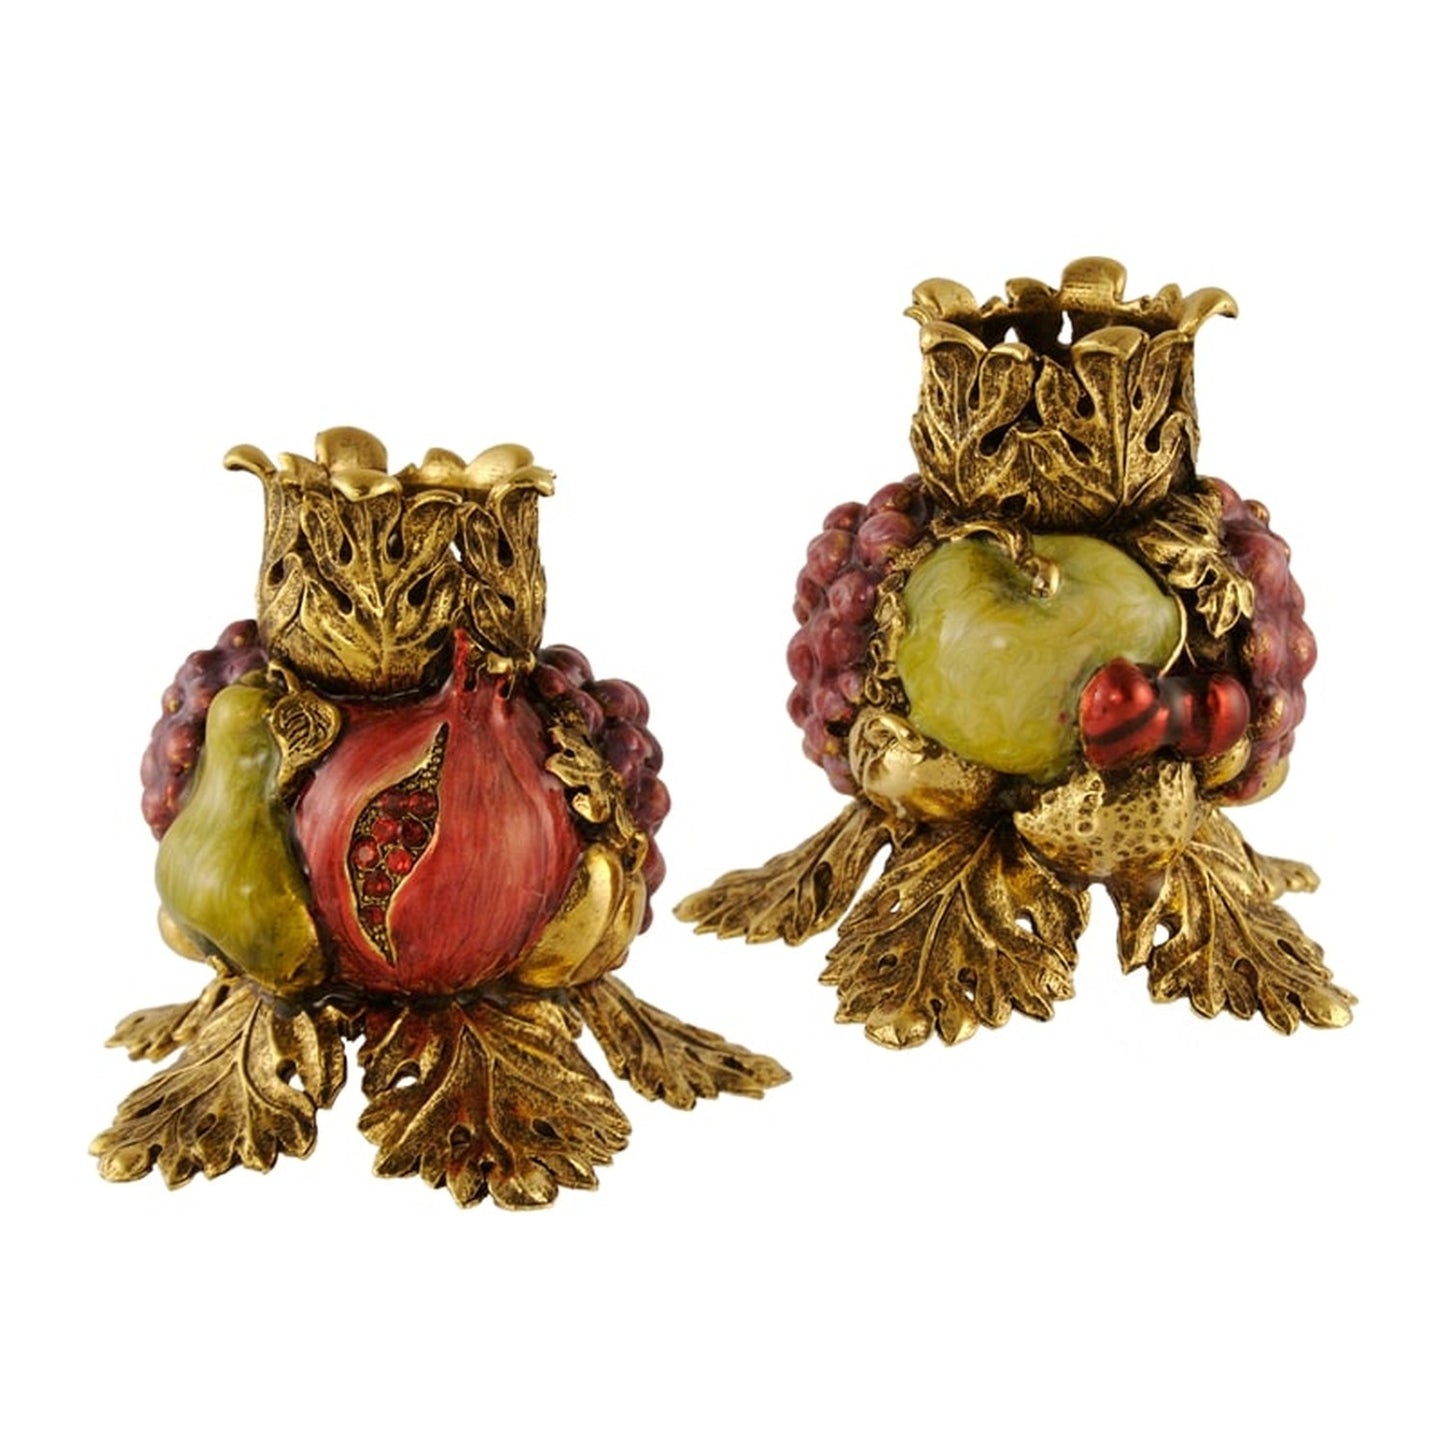 Quest Collection Seven Species Pomegranate Candle Holders